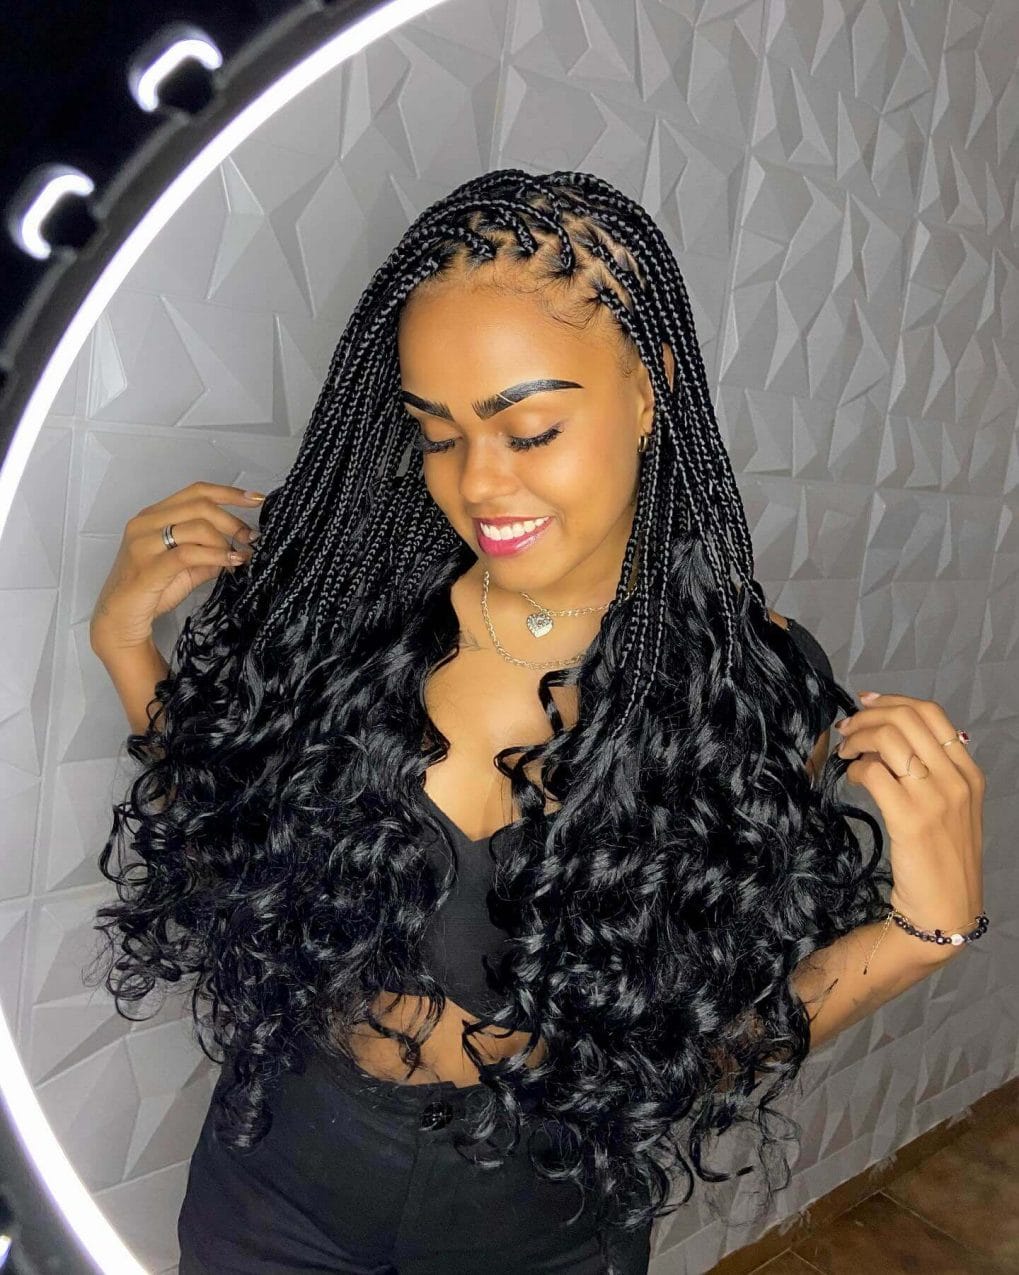 Luxurious waves emerge from symmetrical scalp braids in classic black